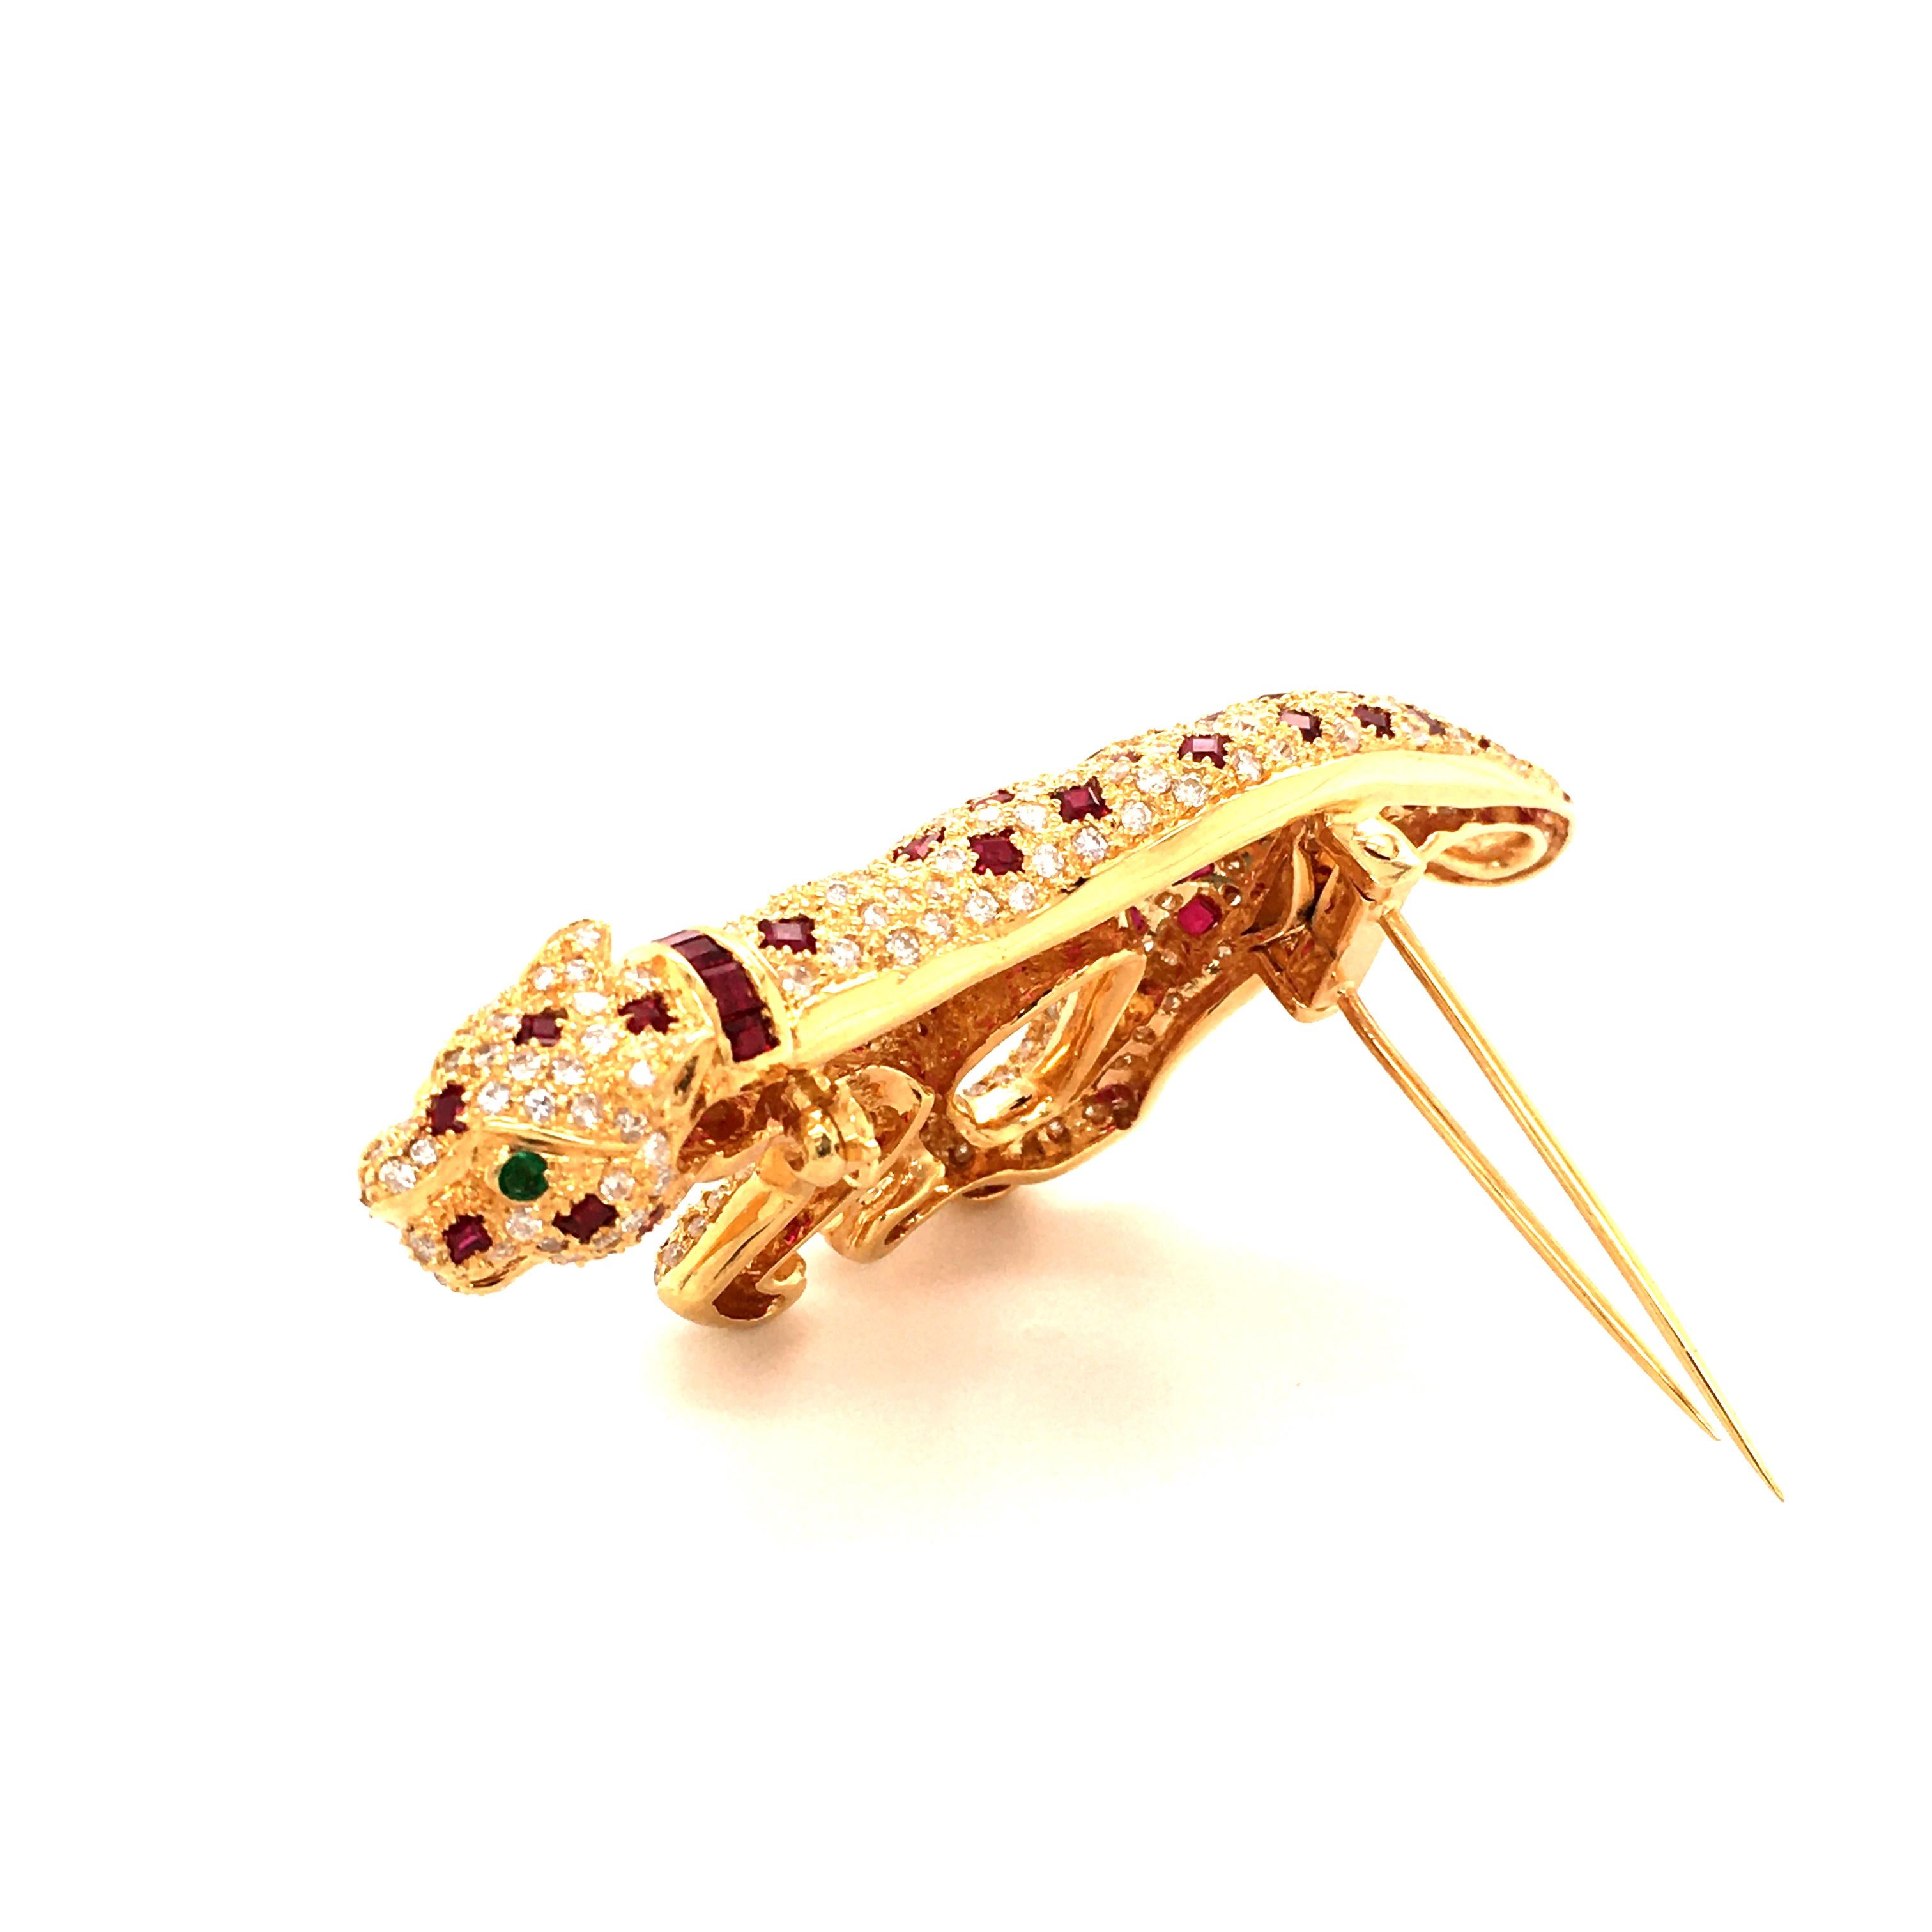 Unique Panther Brooch with Rubies and Diamonds in 18 Karat Yellow Gold 1